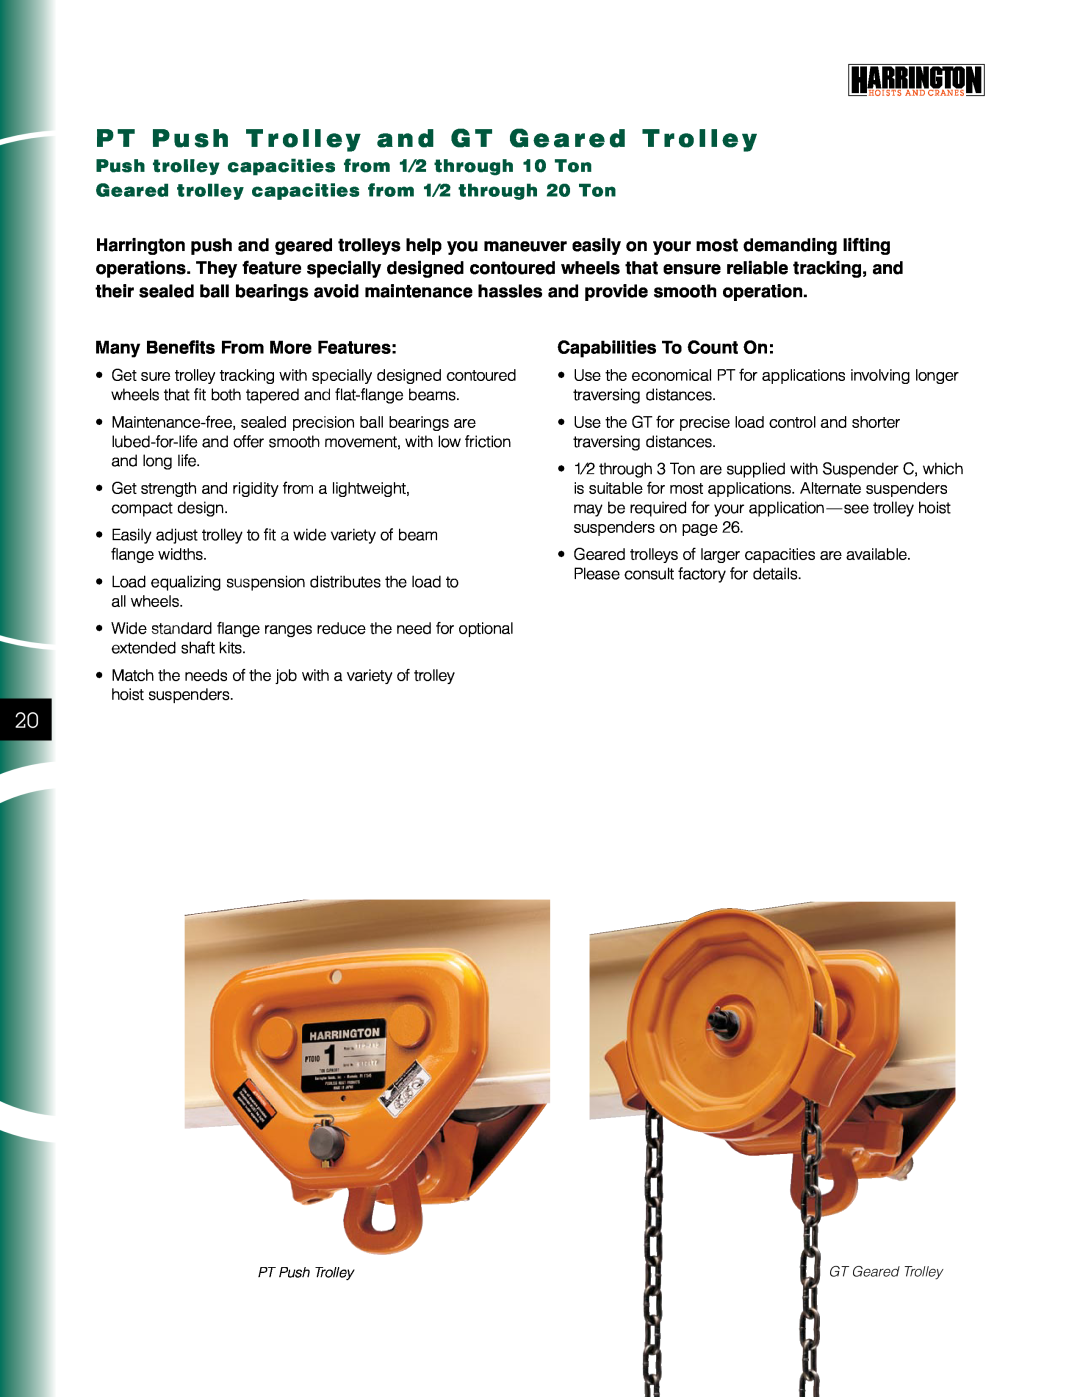 Harrington Hoists PT Push Trolley, GT Geared Trolley manual Many Benefits From More Features, Capabilities To Count On 